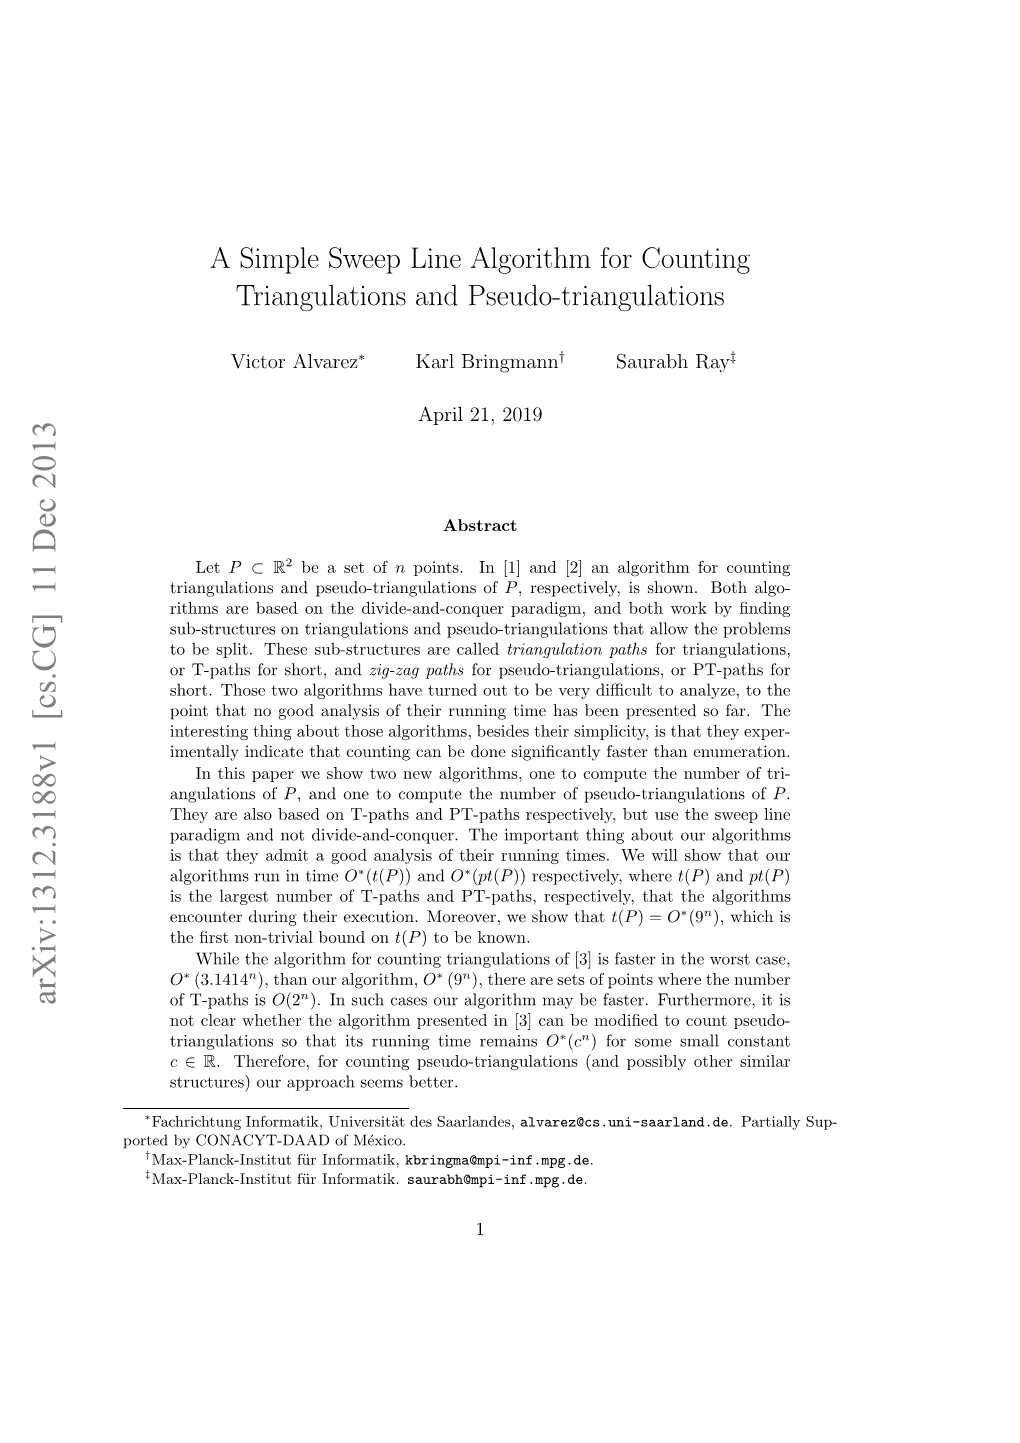 A Simple Sweep Line Algorithm for Counting Triangulations And